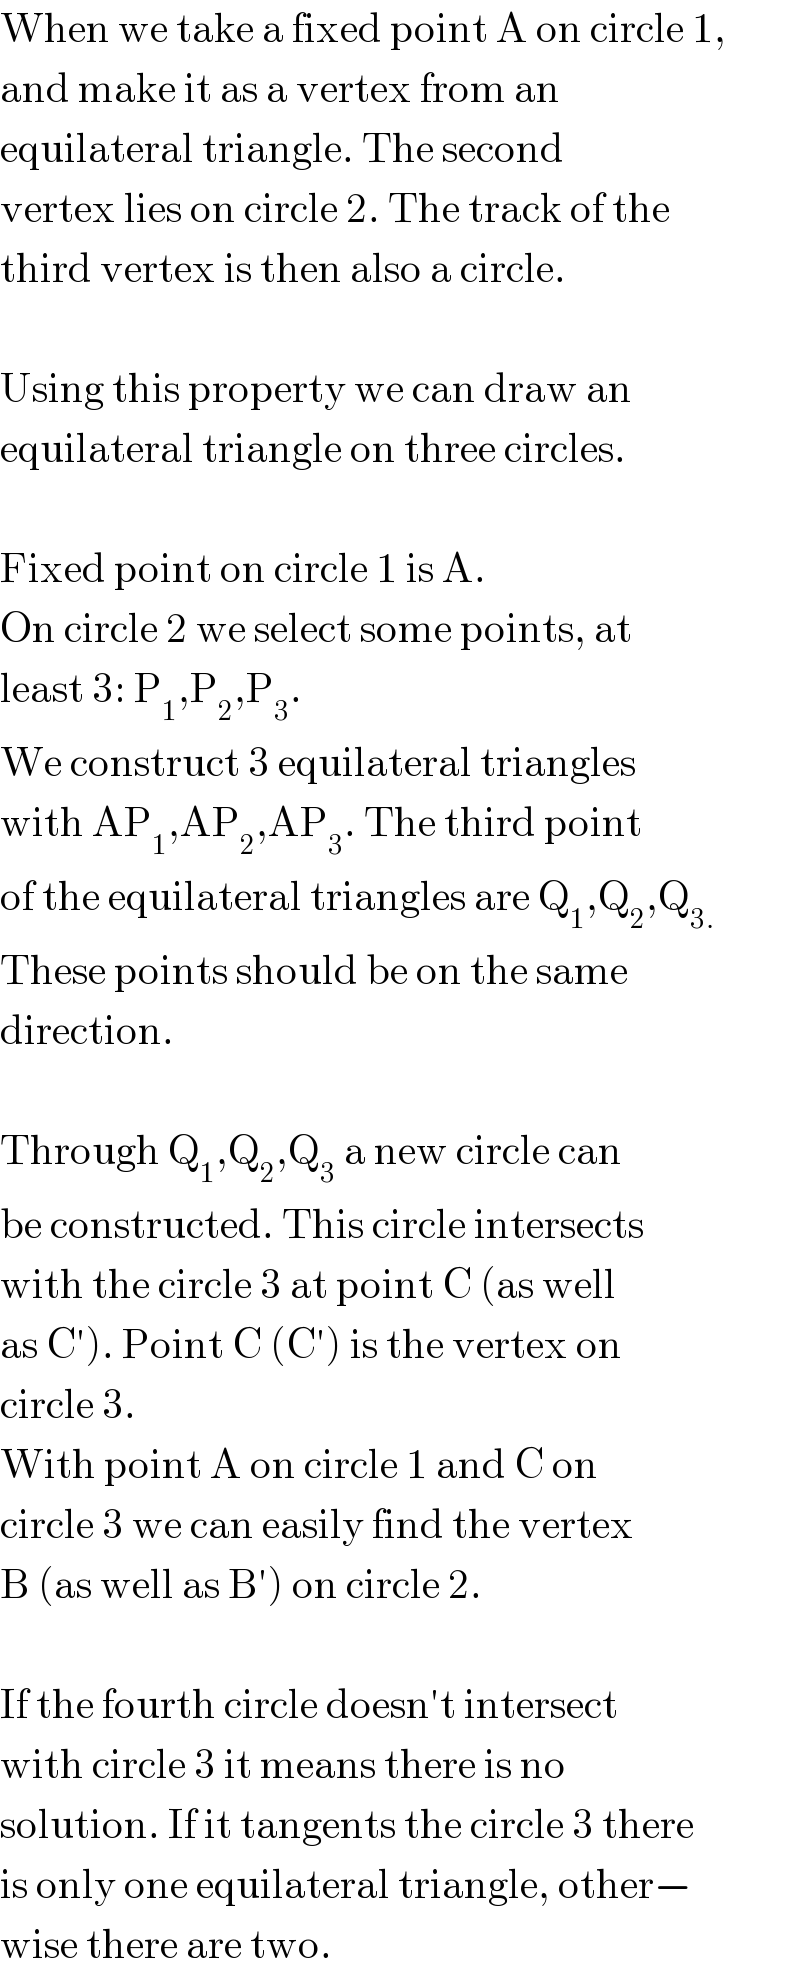 When we take a fixed point A on circle 1,  and make it as a vertex from an  equilateral triangle. The second  vertex lies on circle 2. The track of the  third vertex is then also a circle.     Using this property we can draw an  equilateral triangle on three circles.    Fixed point on circle 1 is A.  On circle 2 we select some points, at  least 3: P_1 ,P_2 ,P_3 .  We construct 3 equilateral triangles  with AP_1 ,AP_2 ,AP_3 . The third point  of the equilateral triangles are Q_1 ,Q_2 ,Q_(3.)   These points should be on the same  direction.    Through Q_1 ,Q_2 ,Q_3  a new circle can  be constructed. This circle intersects  with the circle 3 at point C (as well  as C′). Point C (C′) is the vertex on  circle 3.  With point A on circle 1 and C on  circle 3 we can easily find the vertex  B (as well as B′) on circle 2.    If the fourth circle doesn′t intersect  with circle 3 it means there is no  solution. If it tangents the circle 3 there  is only one equilateral triangle, other−  wise there are two.  